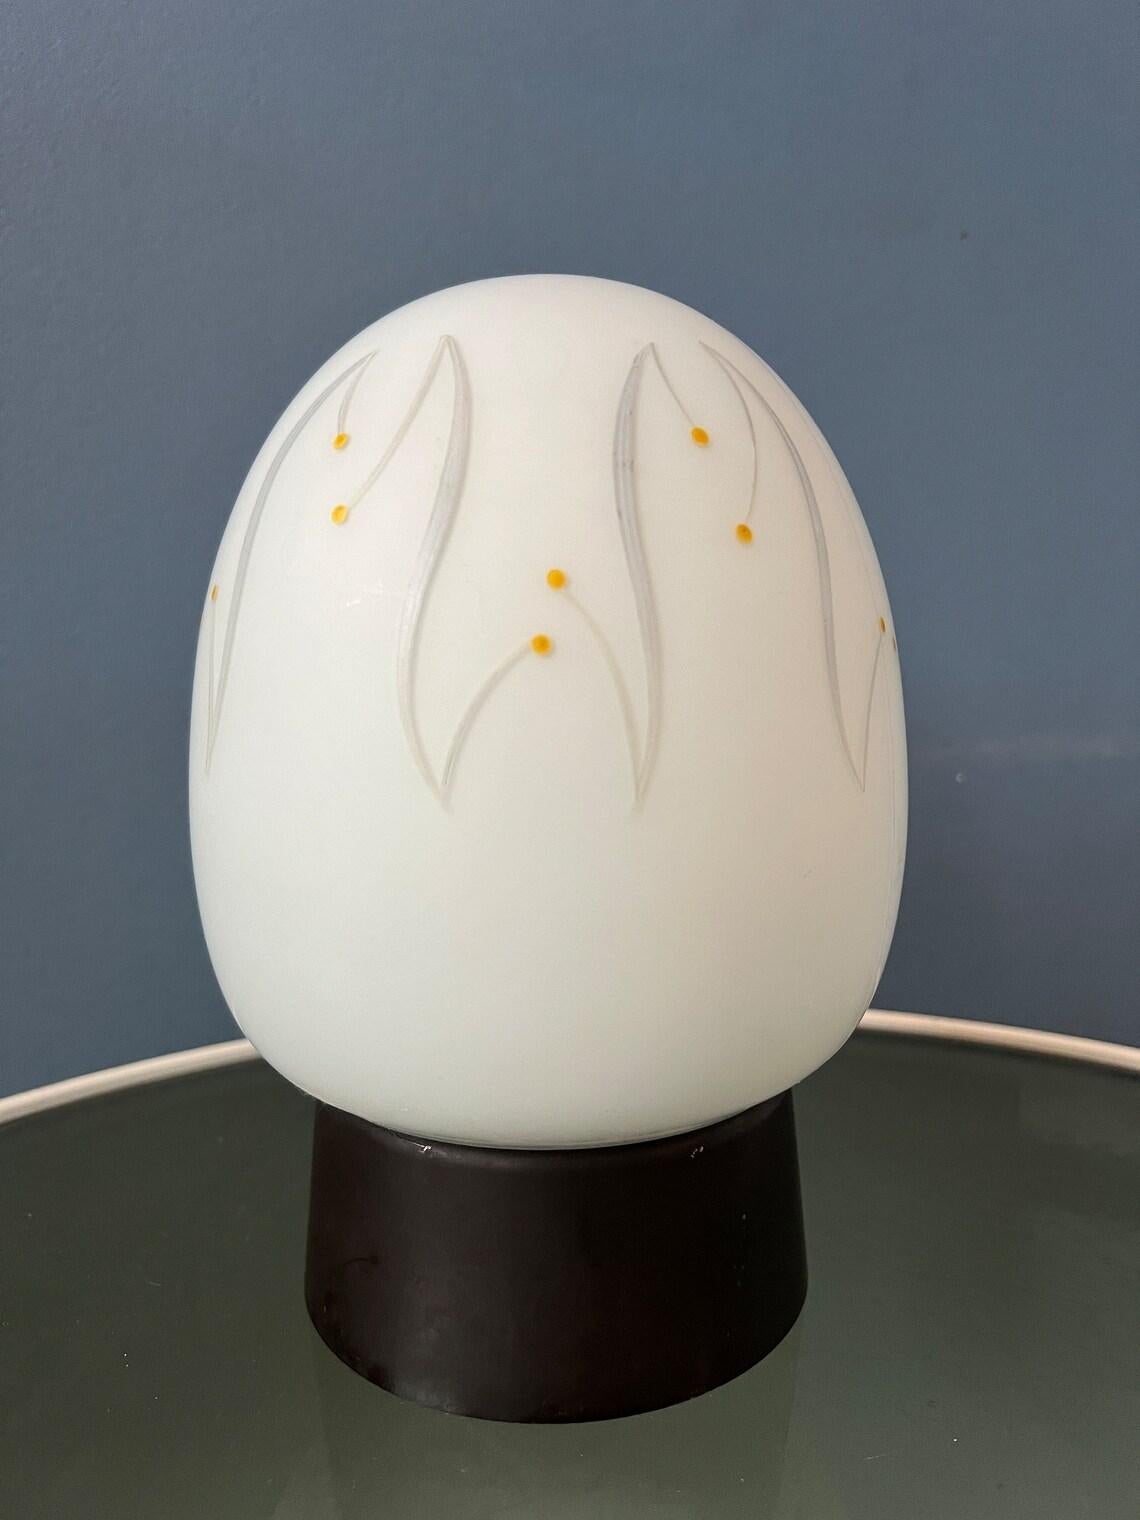 Vintage Egg Thabur Ceiling Lamp with Decorative Pattern, 1970s For Sale 2